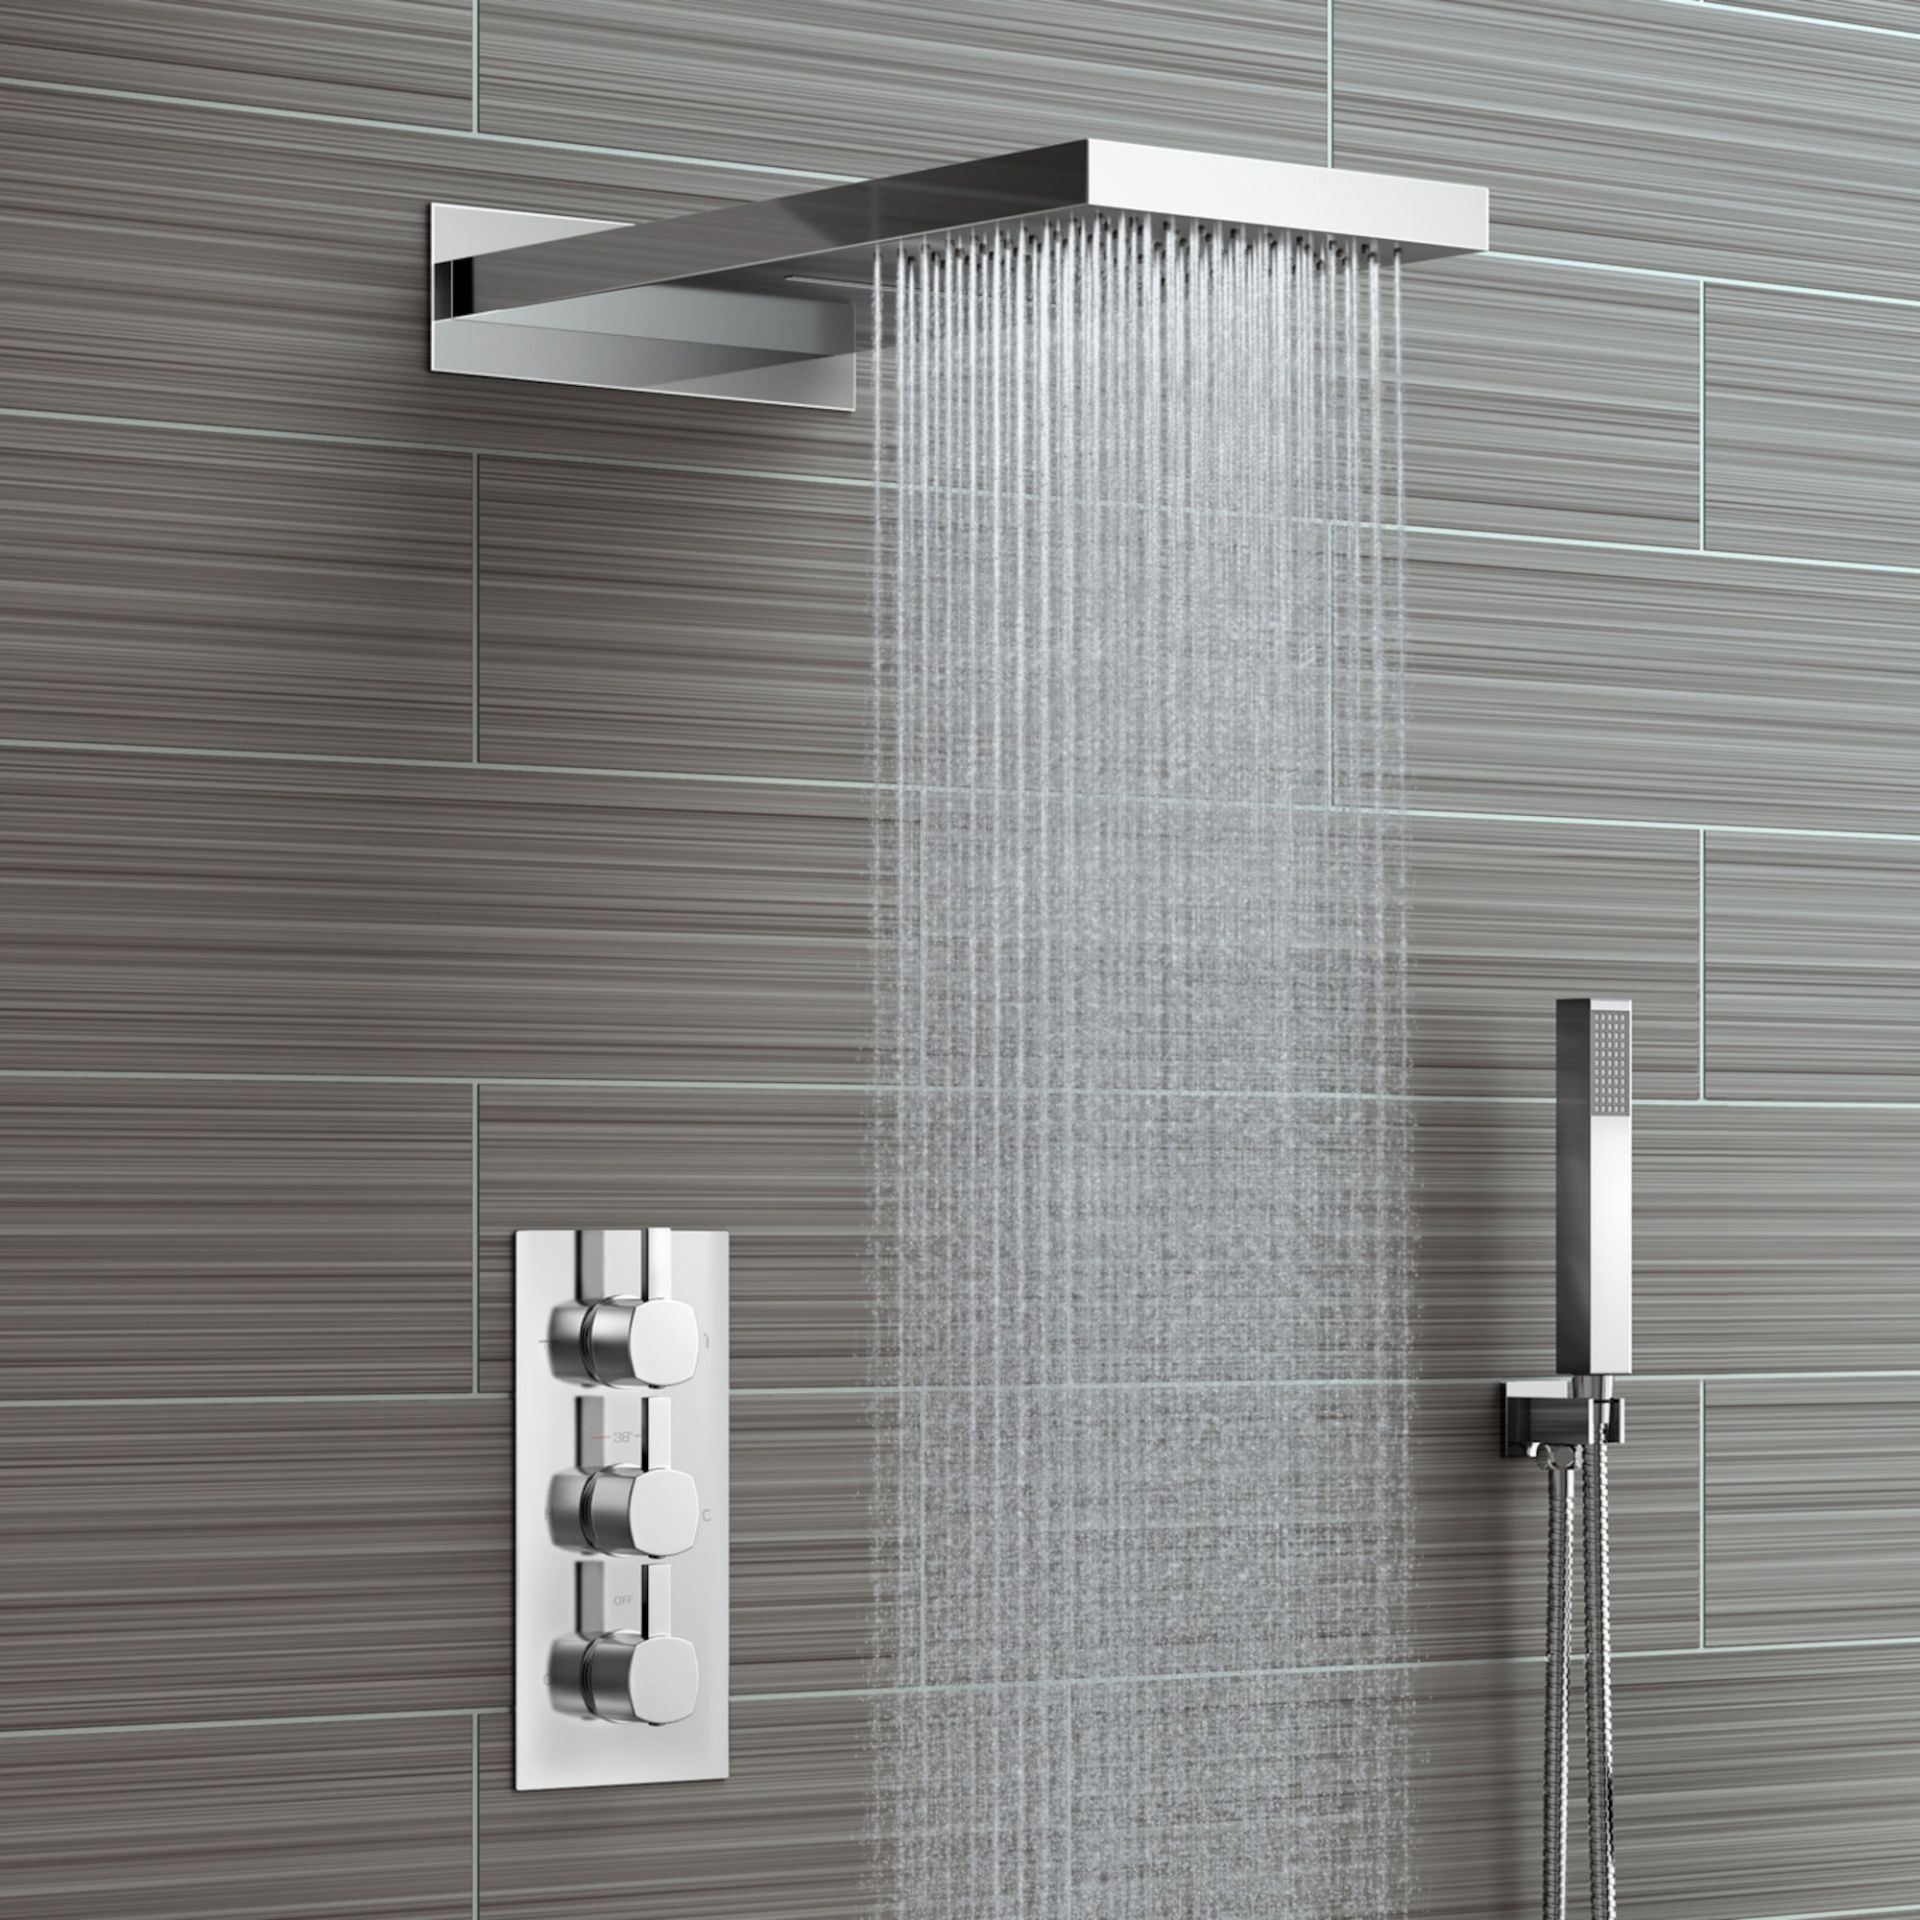 (MQ9) Rectangular Concealed Thermostatic Mixer Rainfall Shower Kit. RRP £549.99. Opt for eithe...